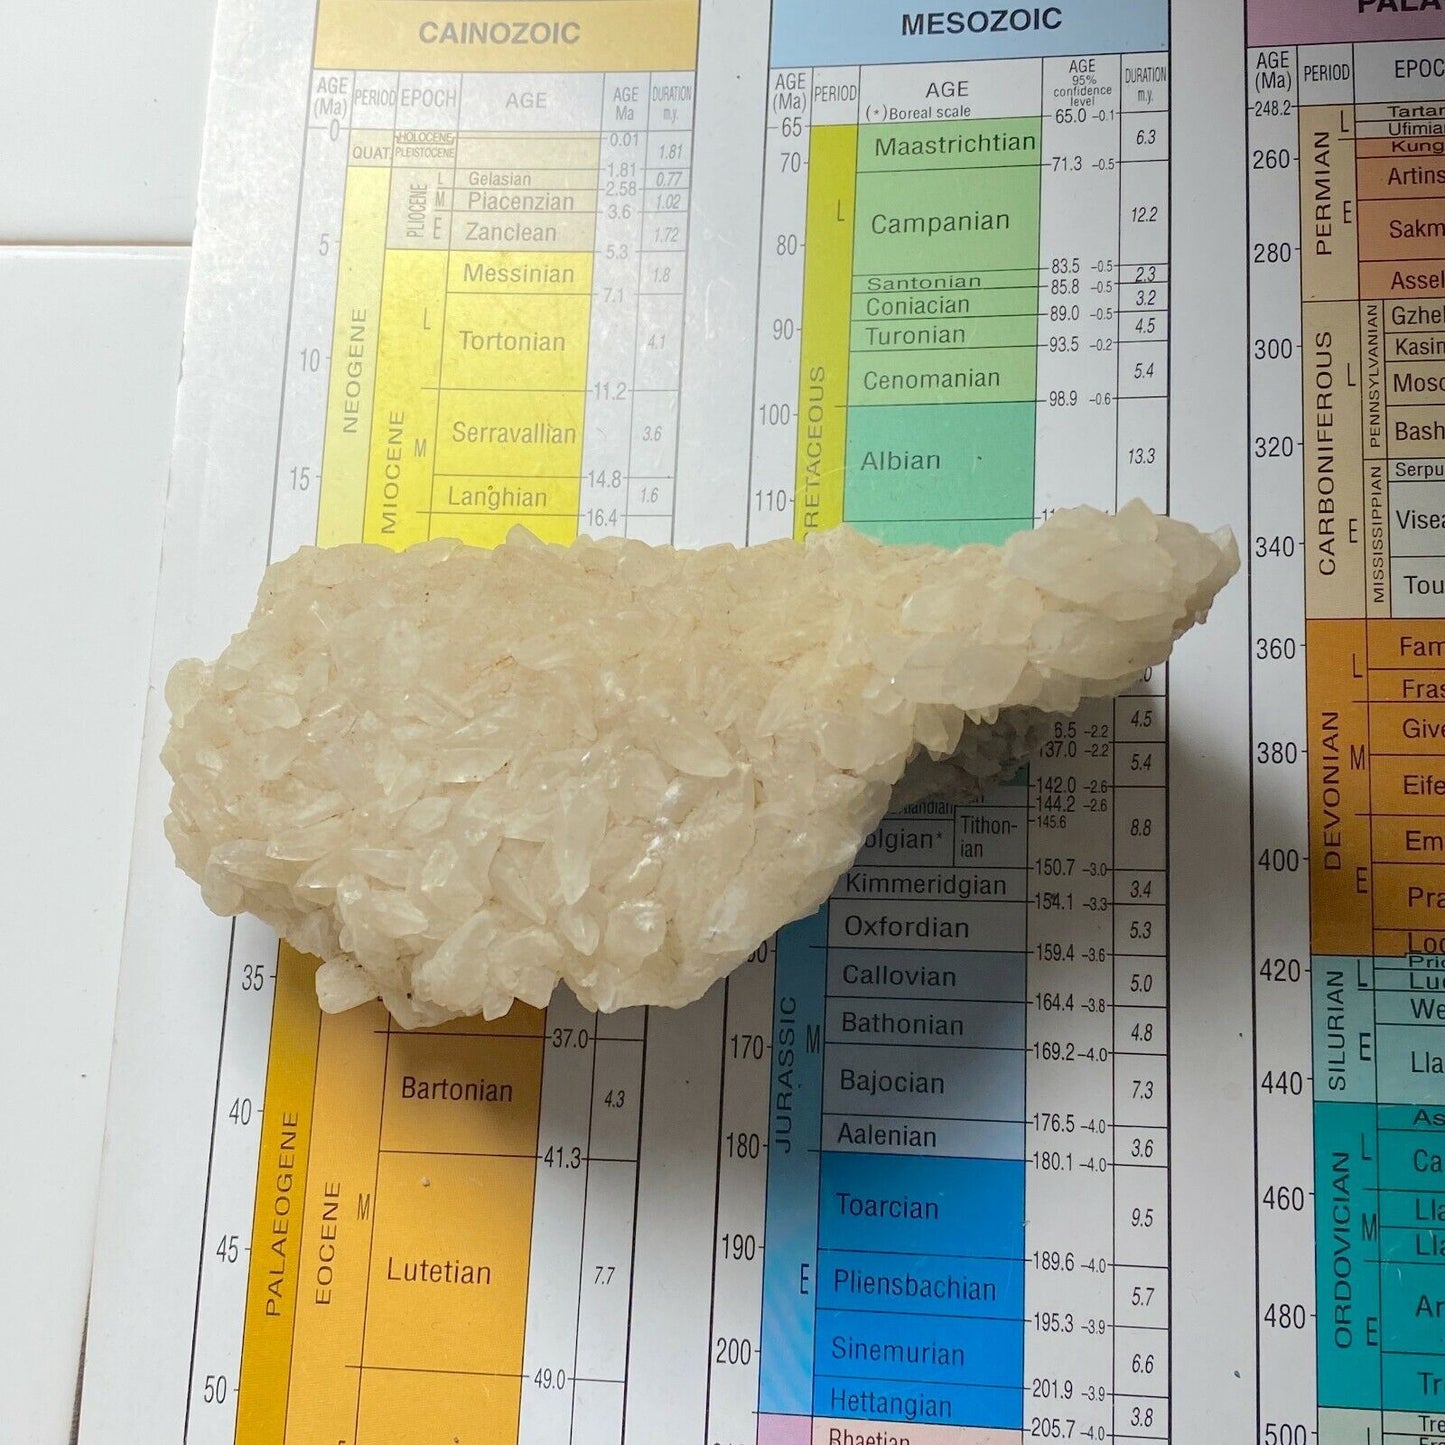 "RICE GRAIN" CALCITE FROM COLEMANS QUARRY, SOMERSET. 280g. MF6306